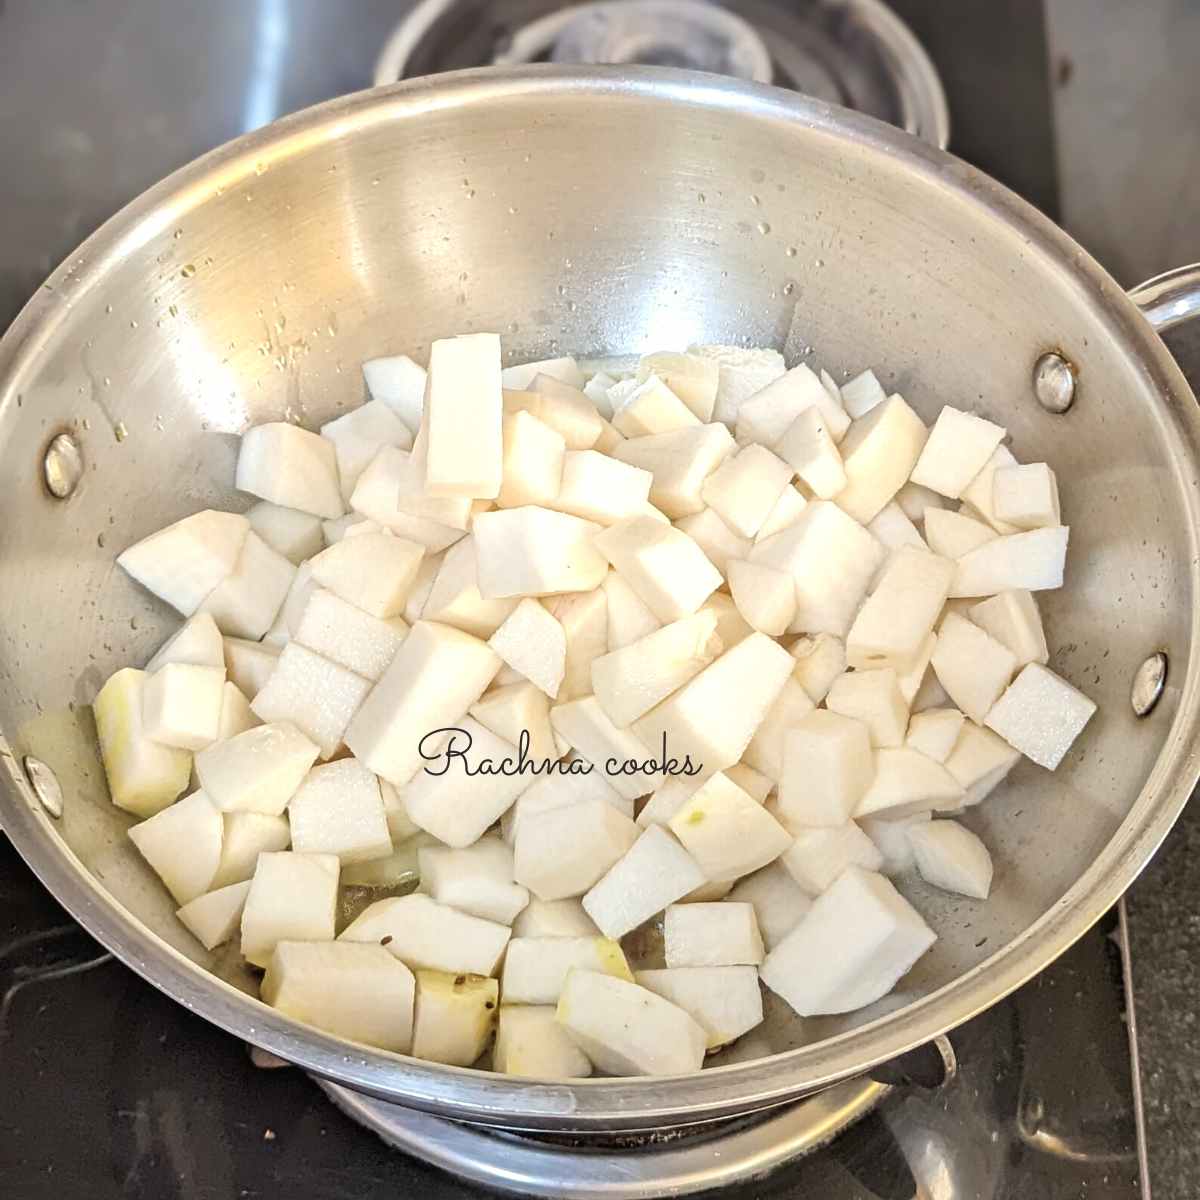 A pan with cubed turnips.